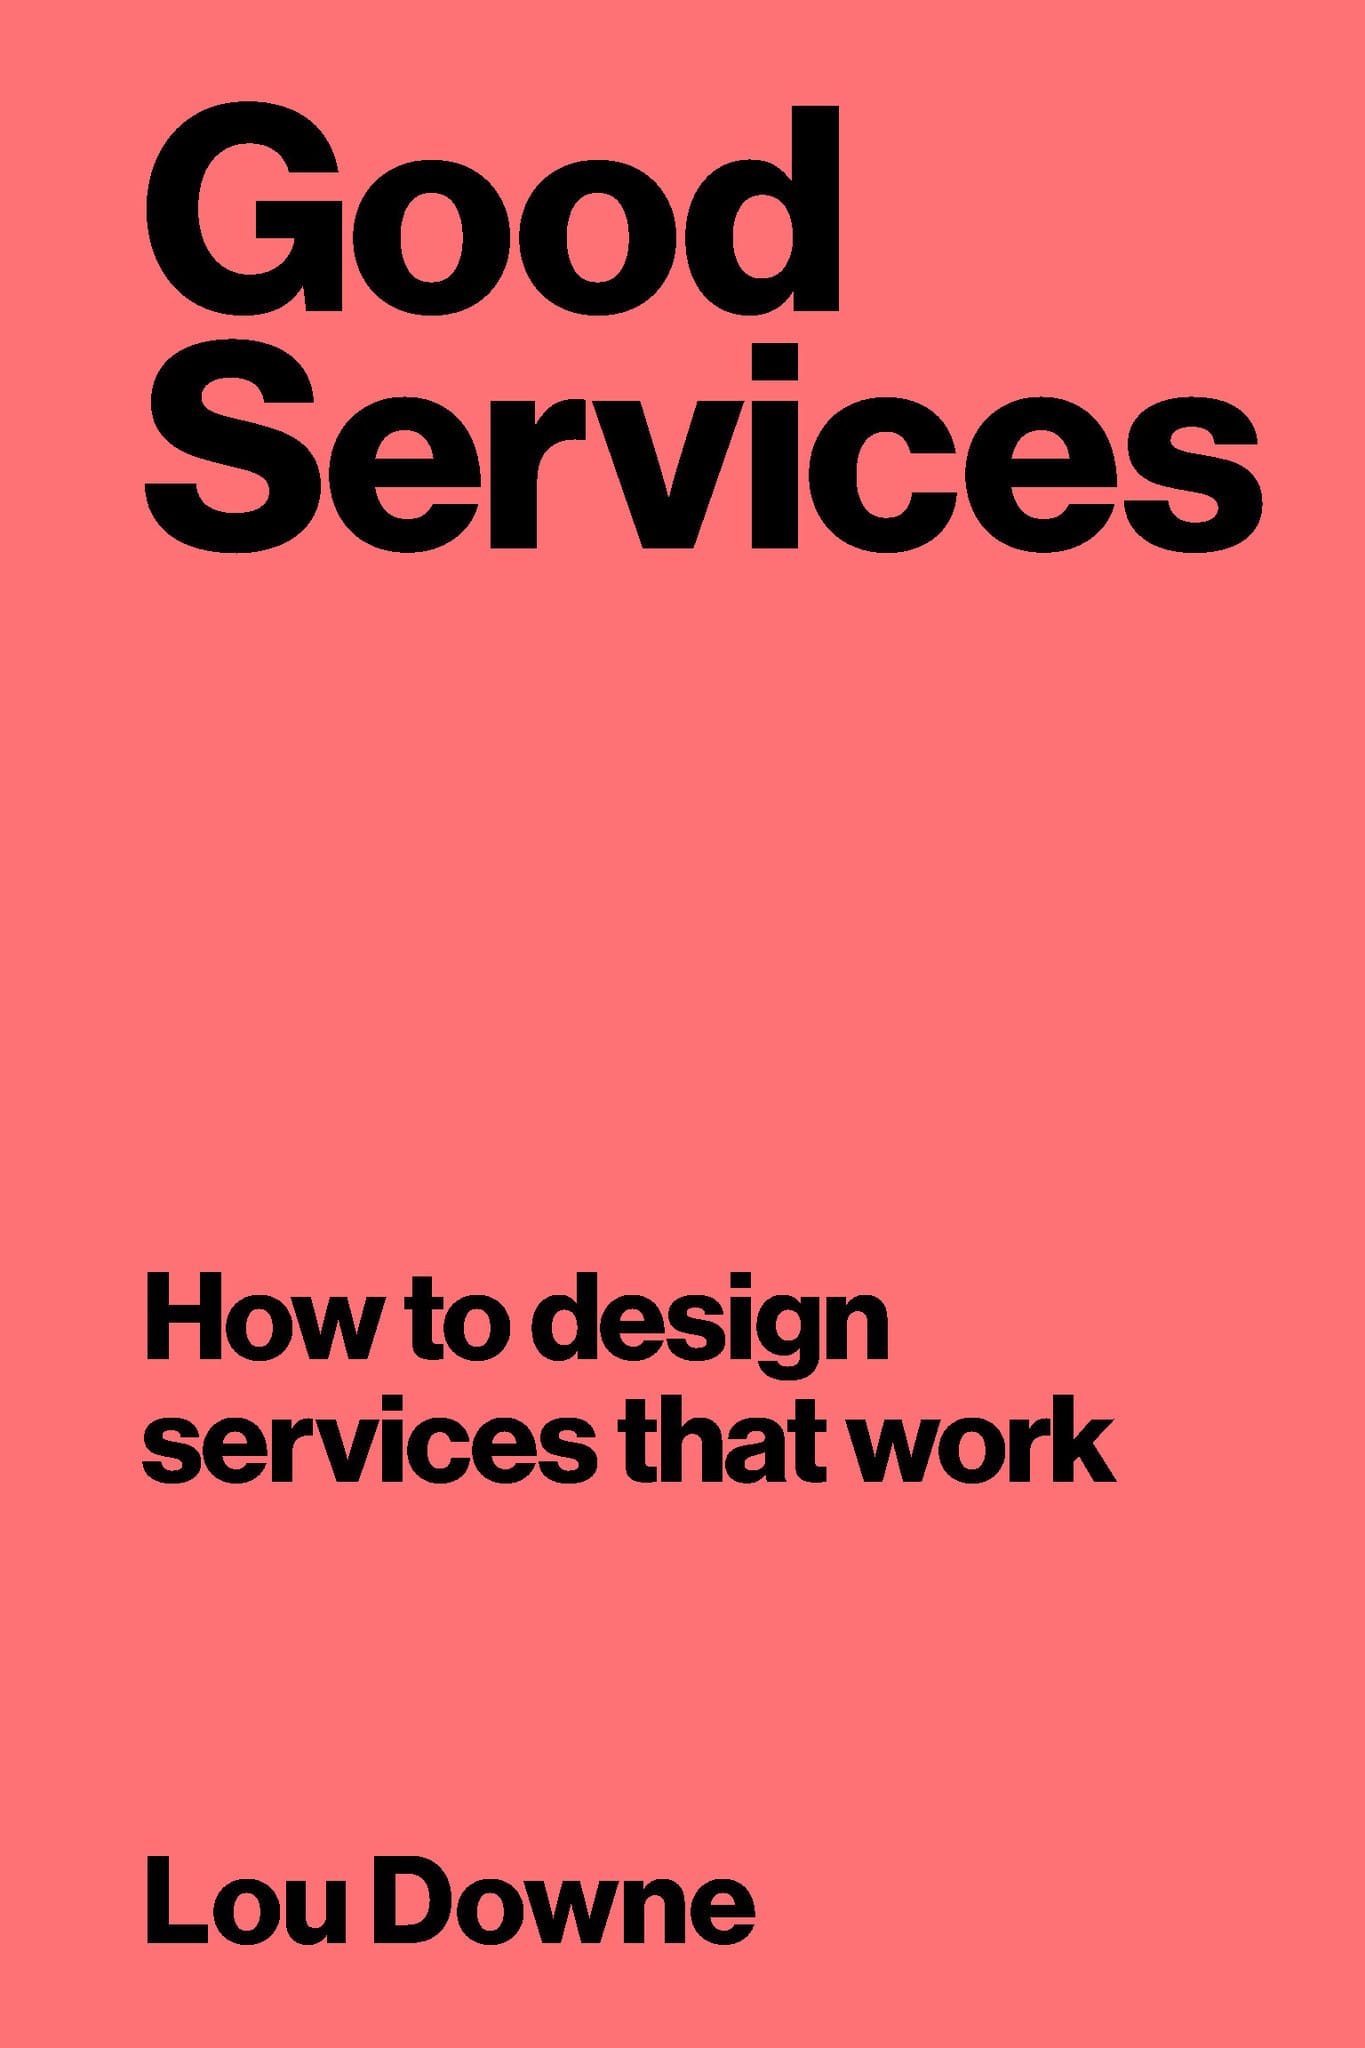 The cover of Good Services